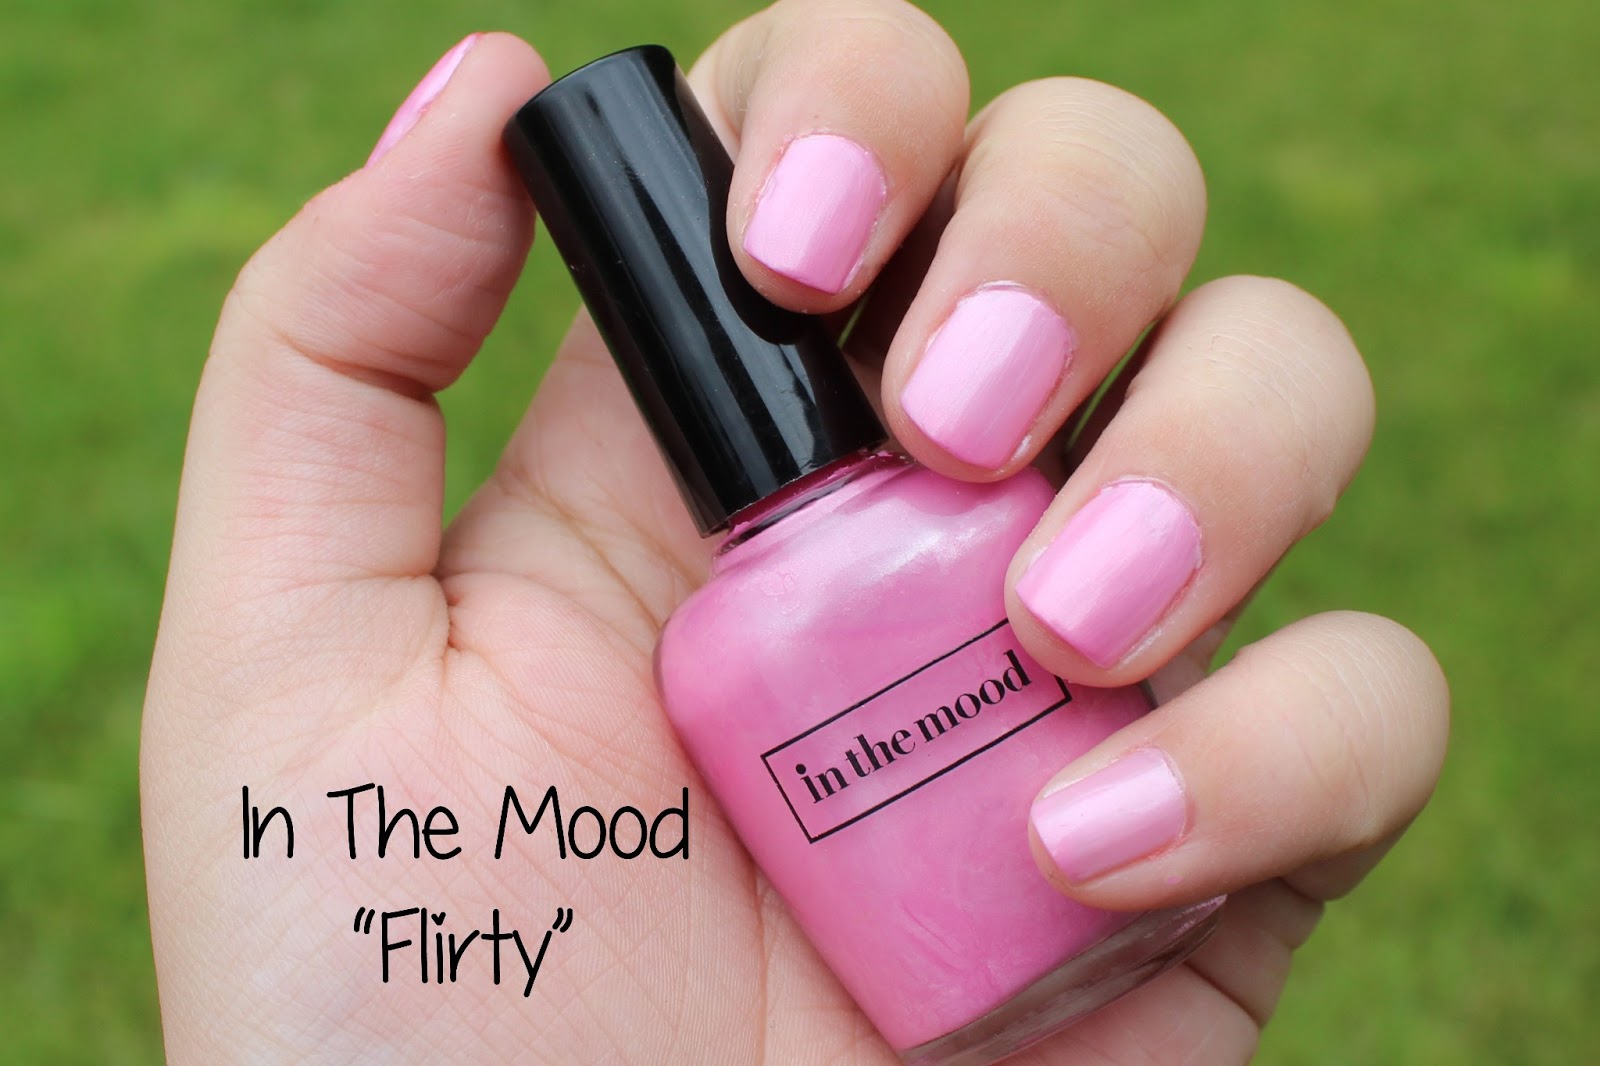 8. "10 Fun and Flirty Nail Shapes and Colors for Date Night" - wide 4